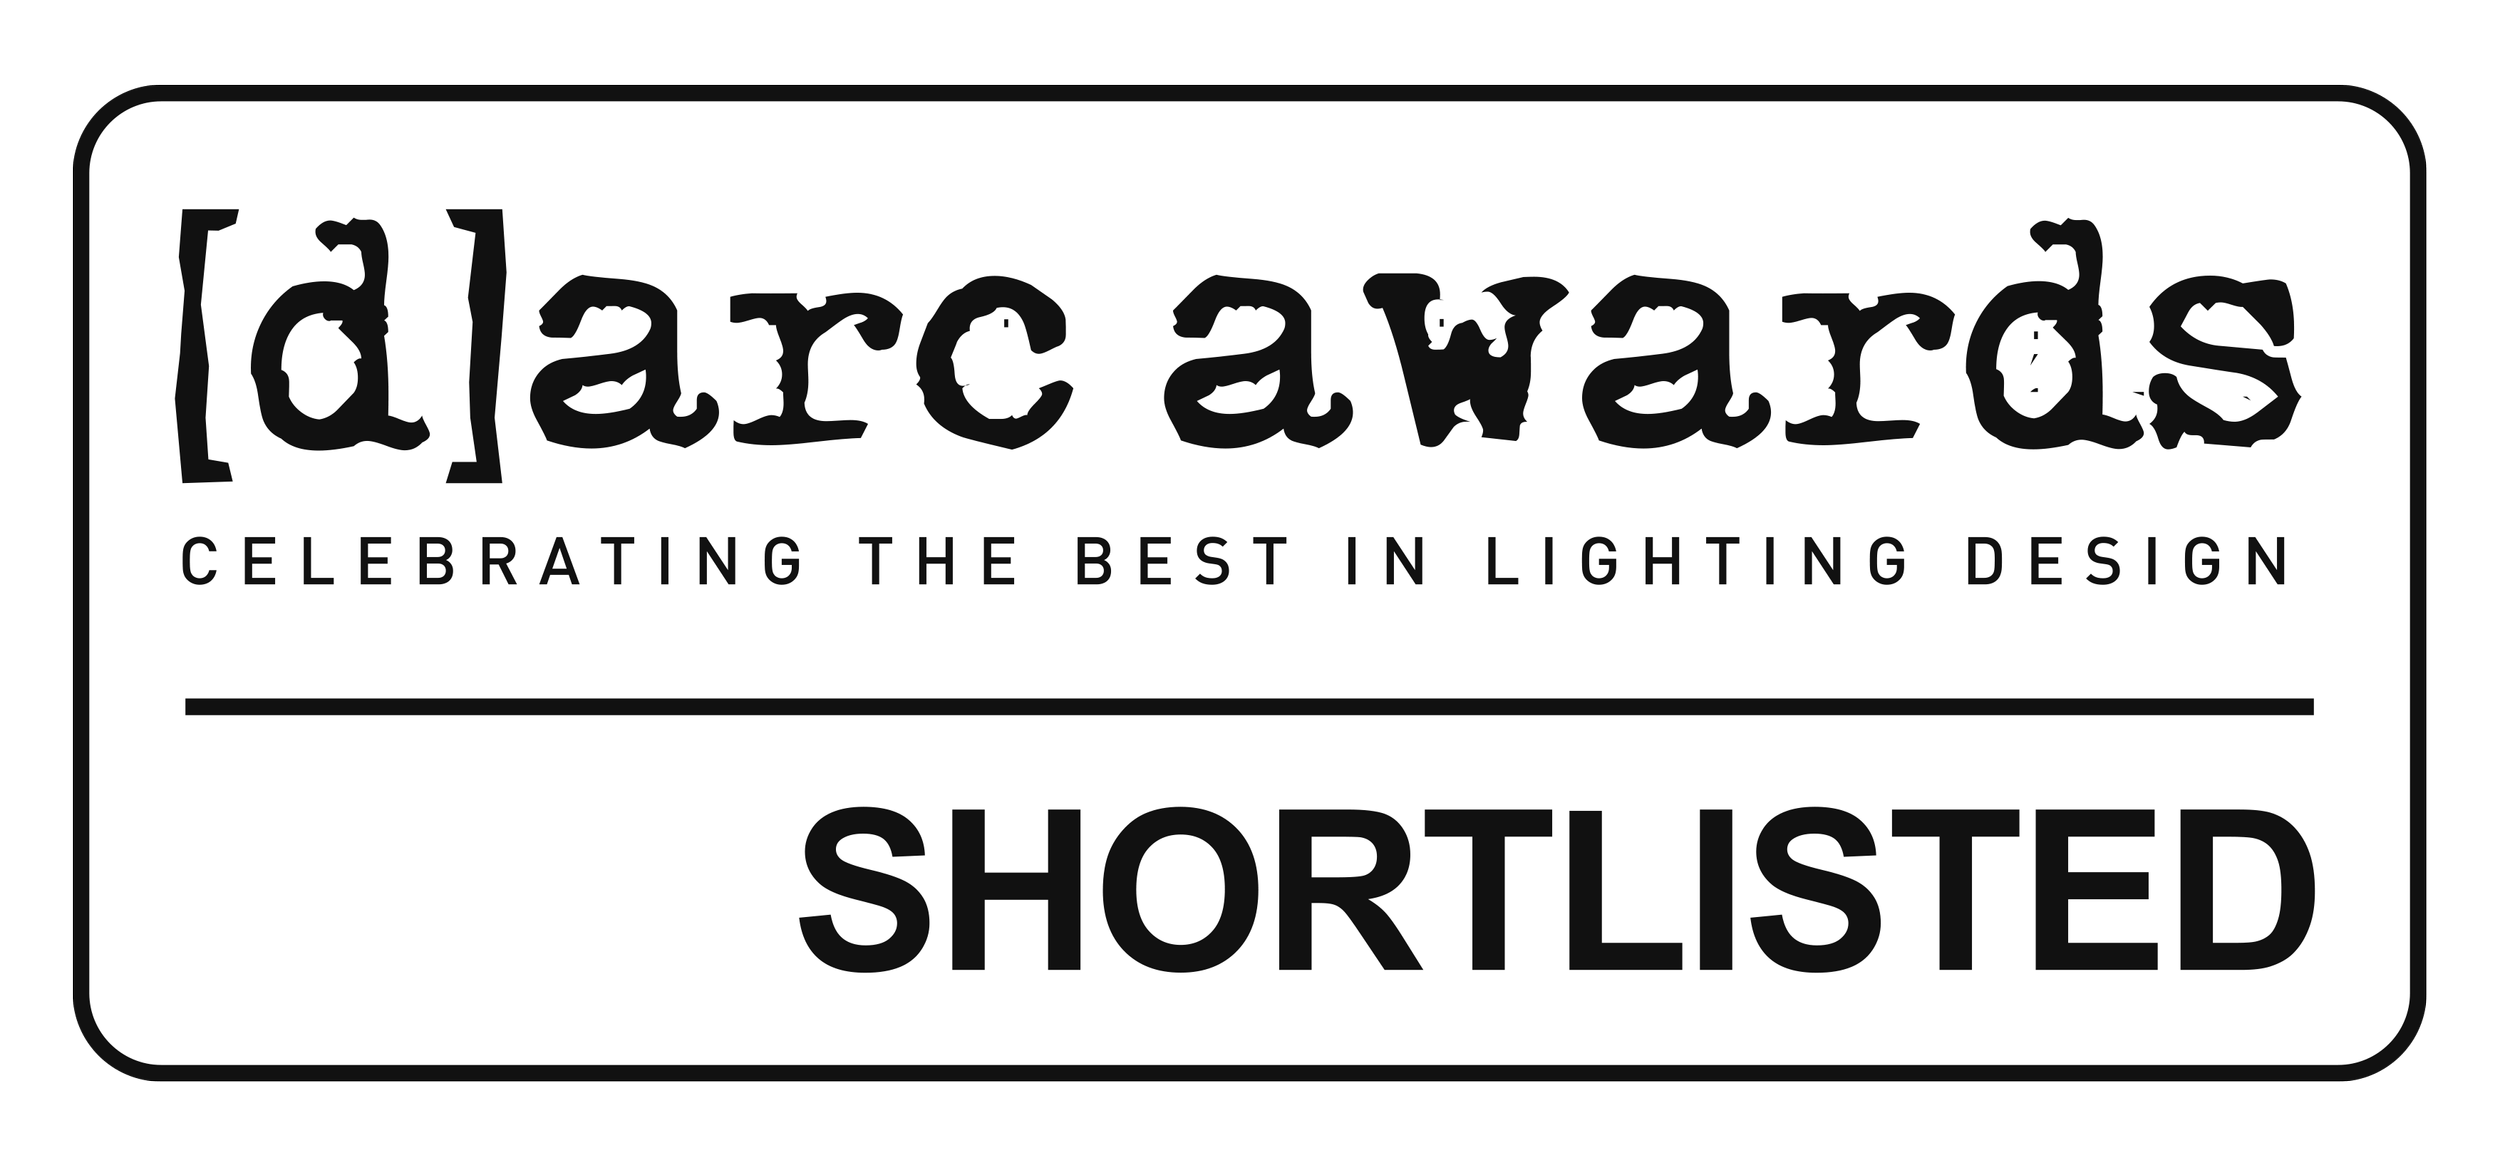 Shortlisted for the 2022 Darc Awards